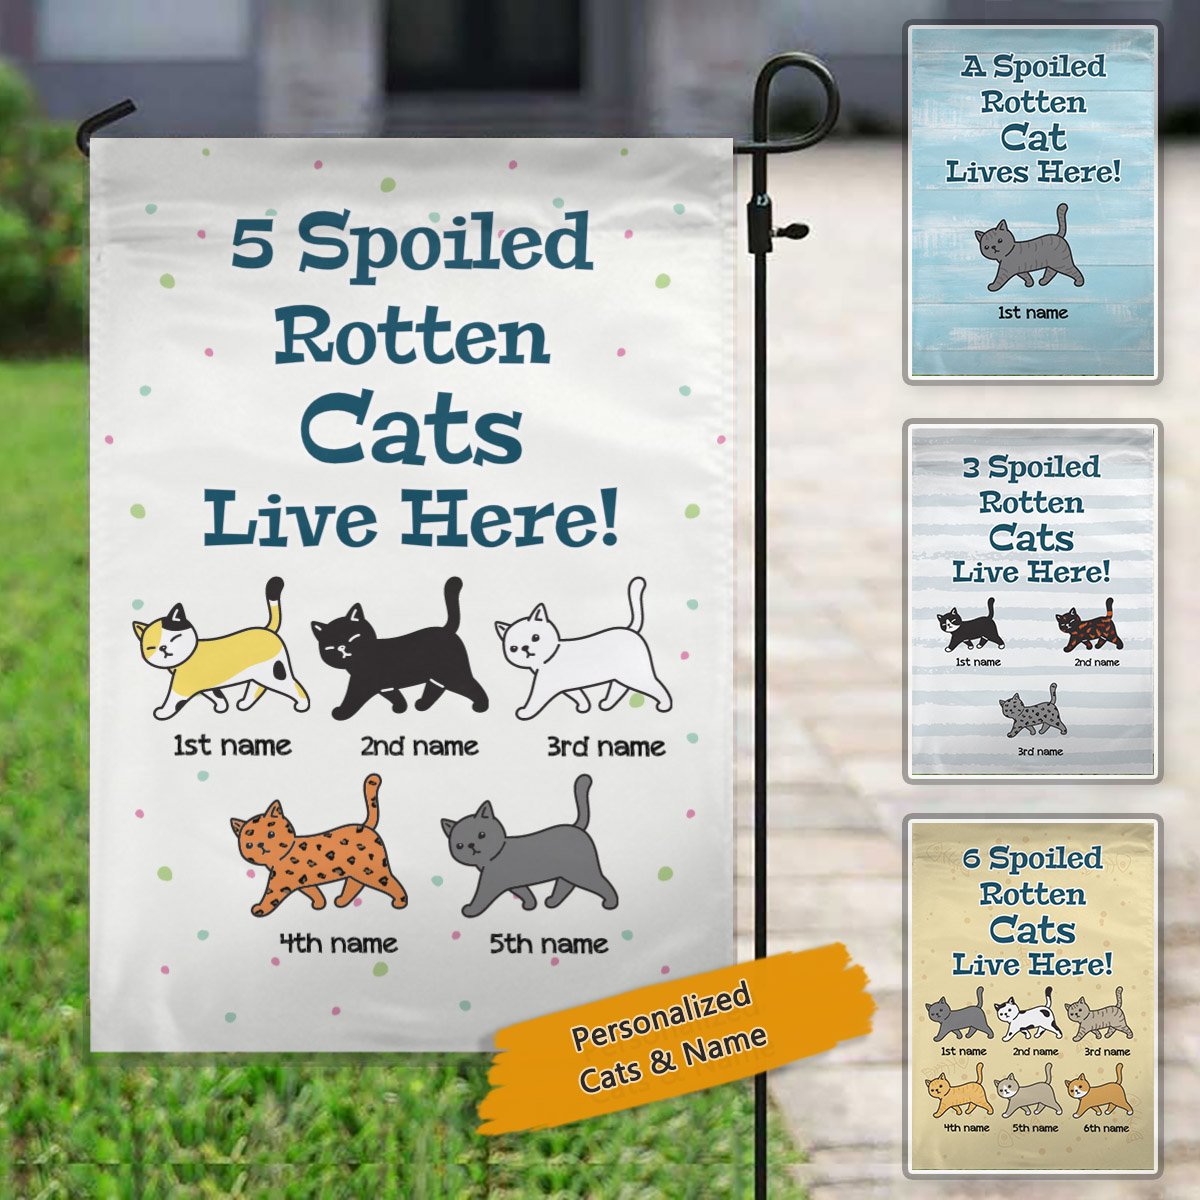 Spoiled Rotten Cat Lives Here Personalized Cat Decorative Garden Flags